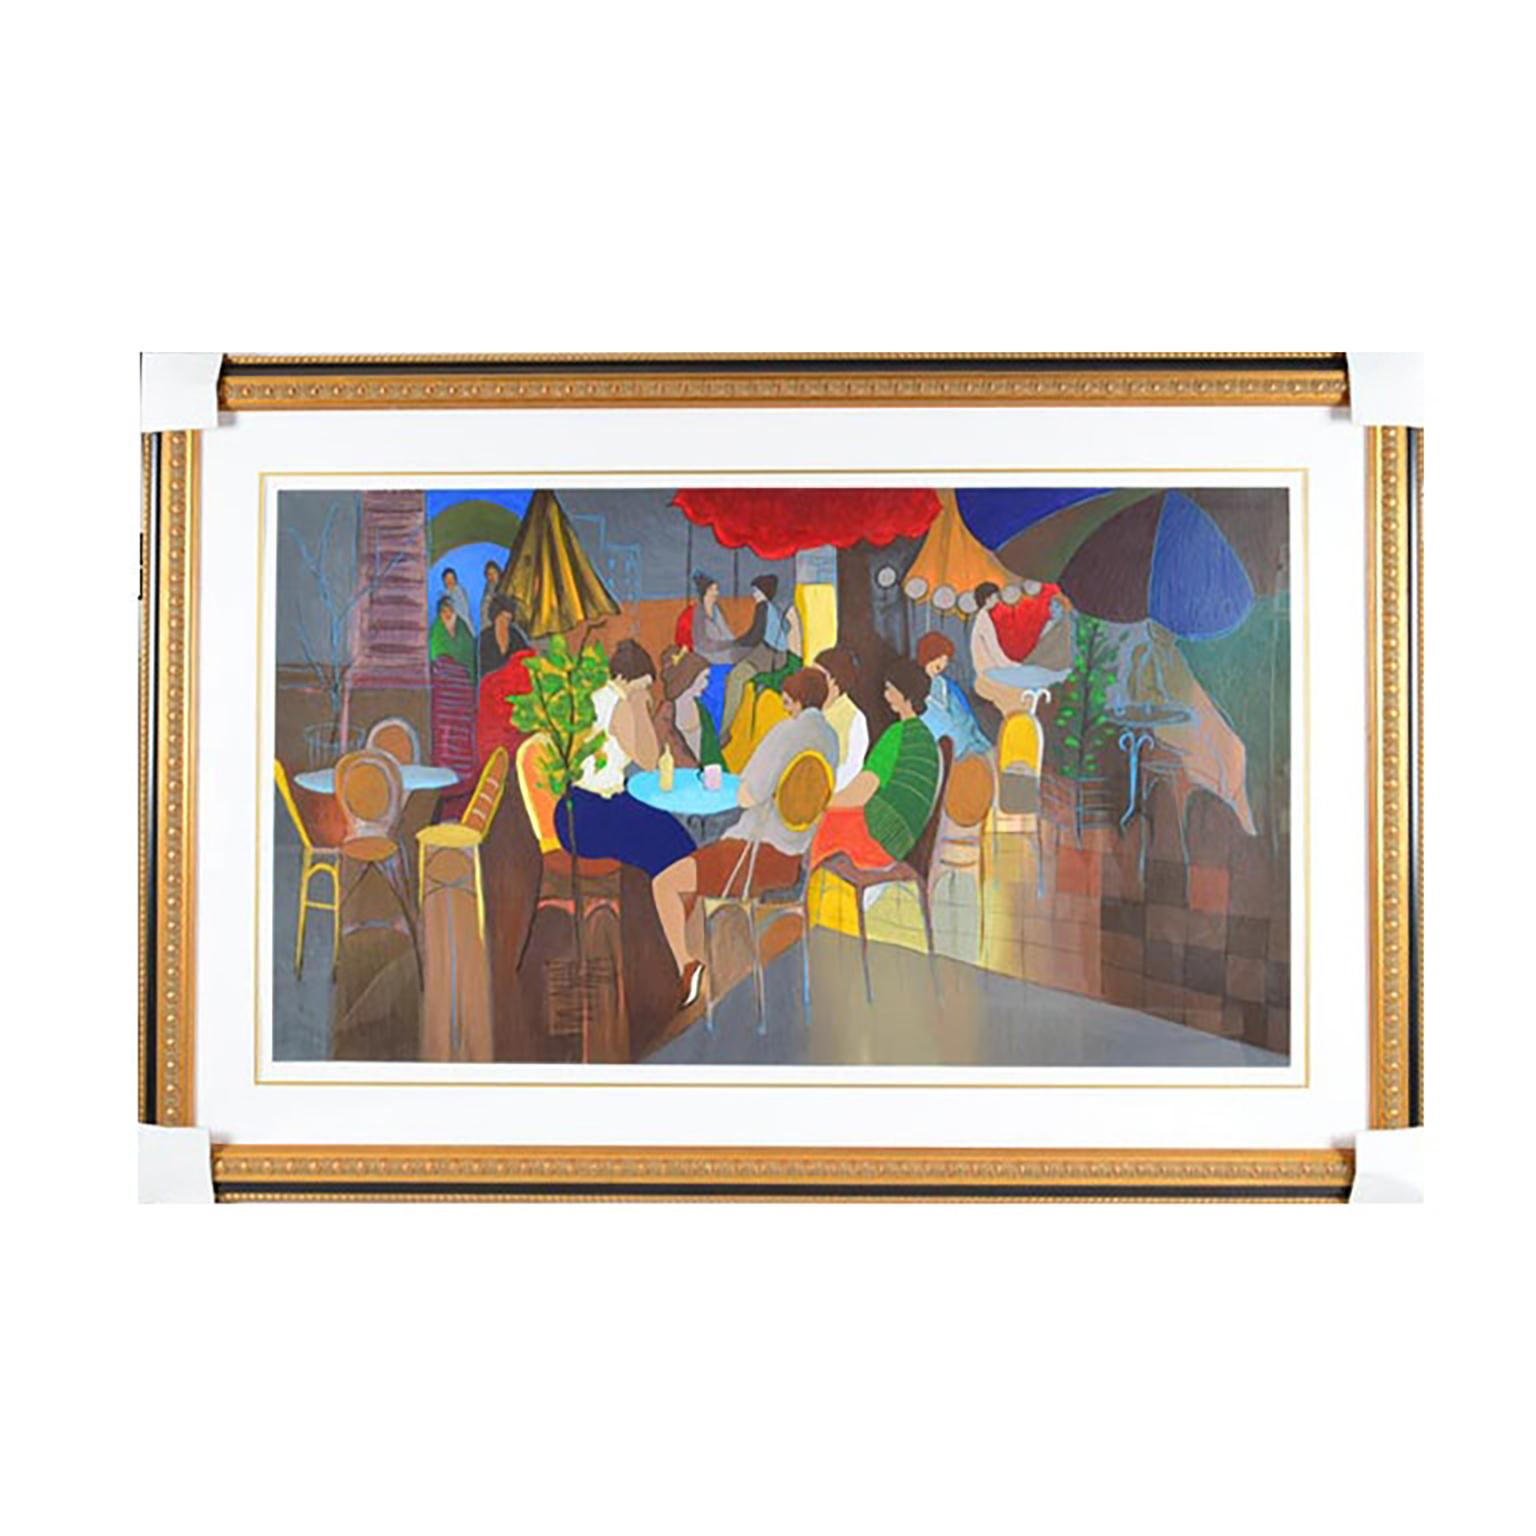 A serigraph titled Night Cafe by listed artist, Itzchak Tarkay (Israeli, 1935 – 2012). The print depicts a Post-Impressionistic cafe scene. The work is numbered 211 out of 300 to the lower left corner and pencil signed to lower right corner reading